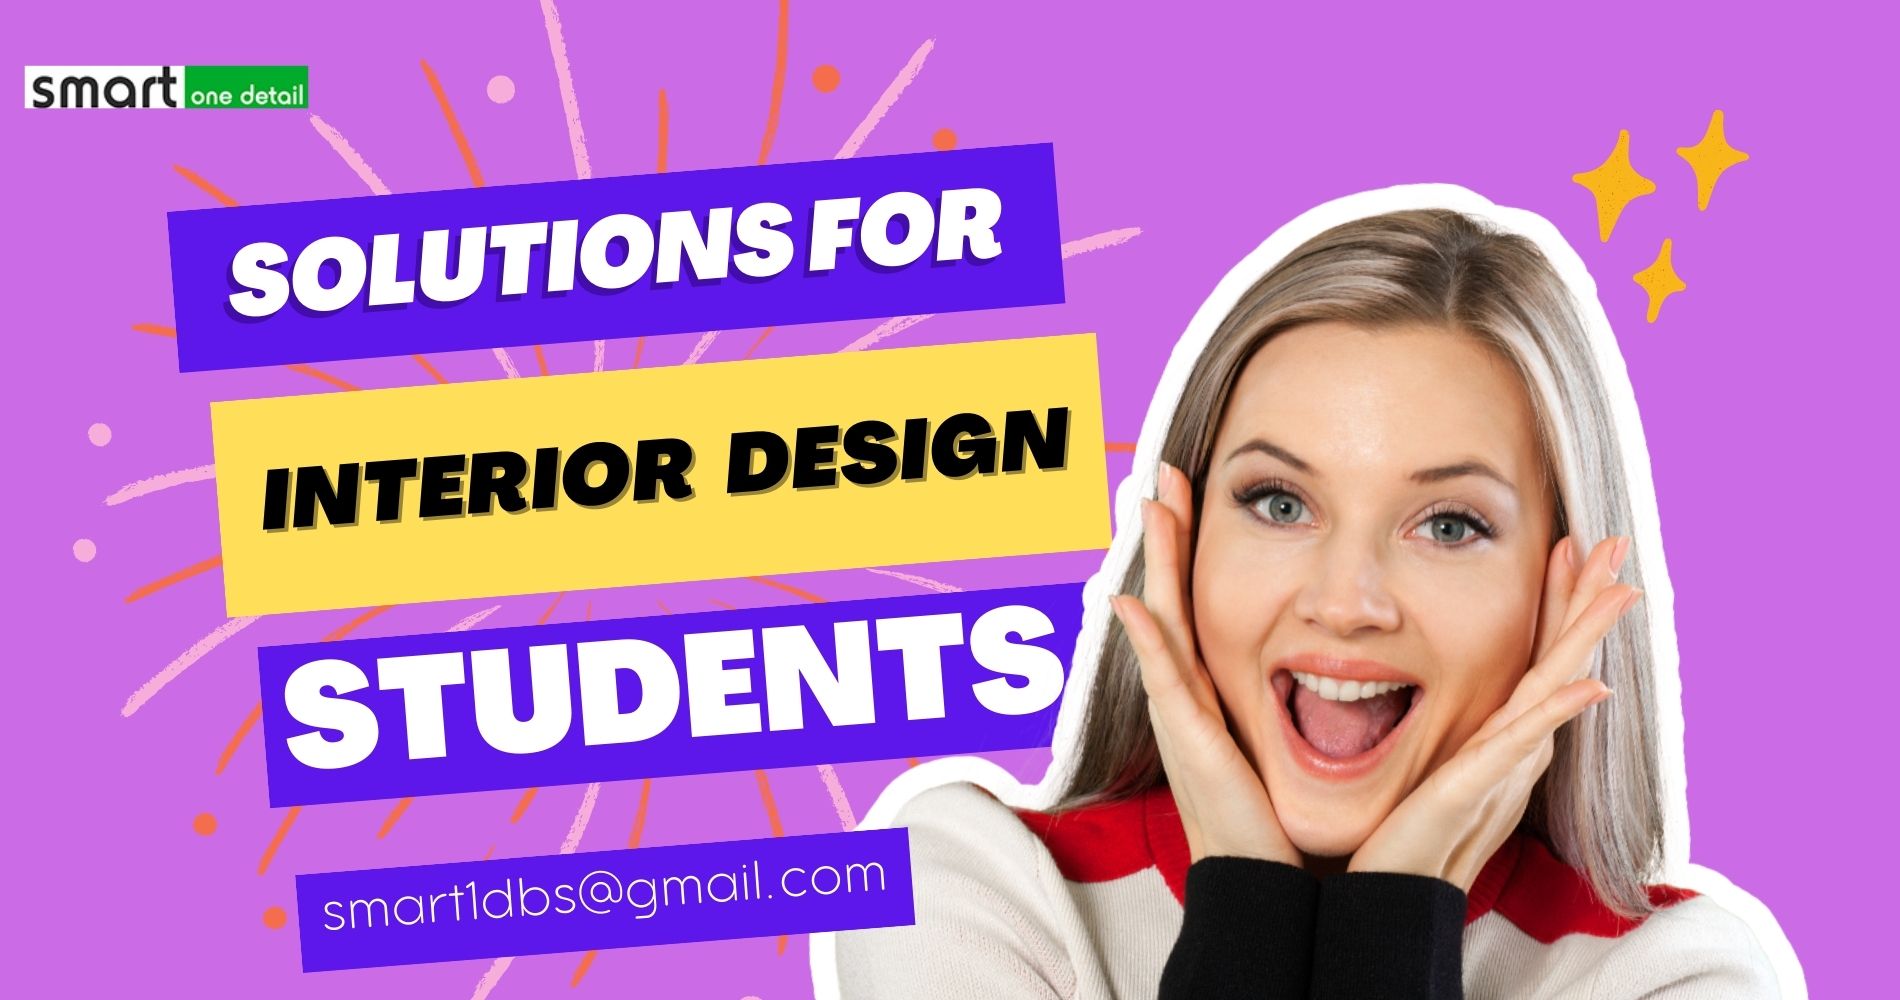 Solutions for interior design students